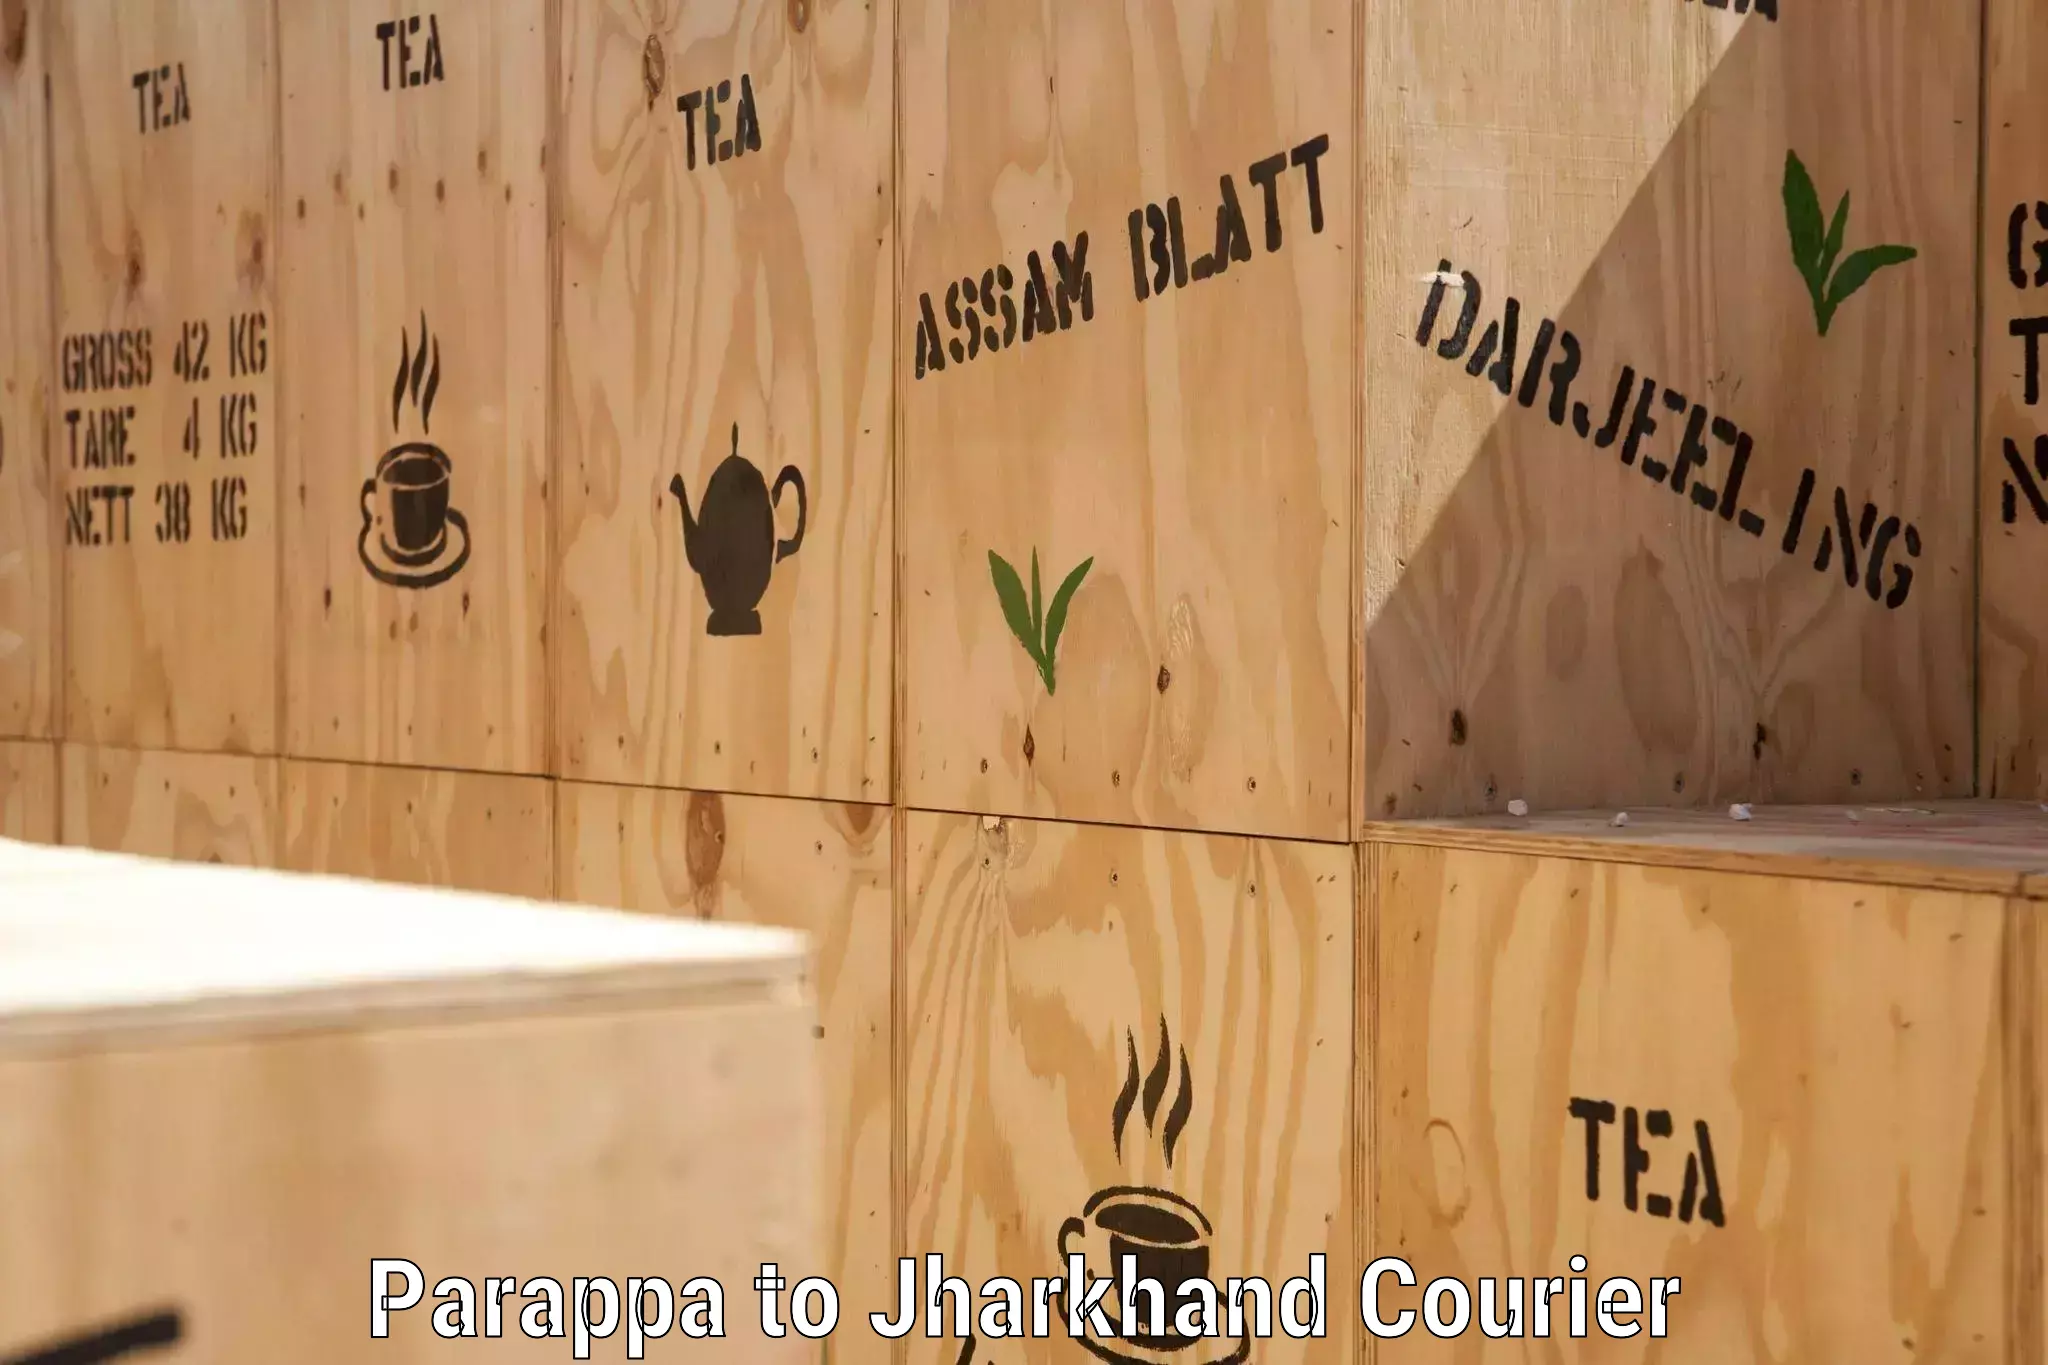 Cost-effective shipping solutions Parappa to Dhanbad